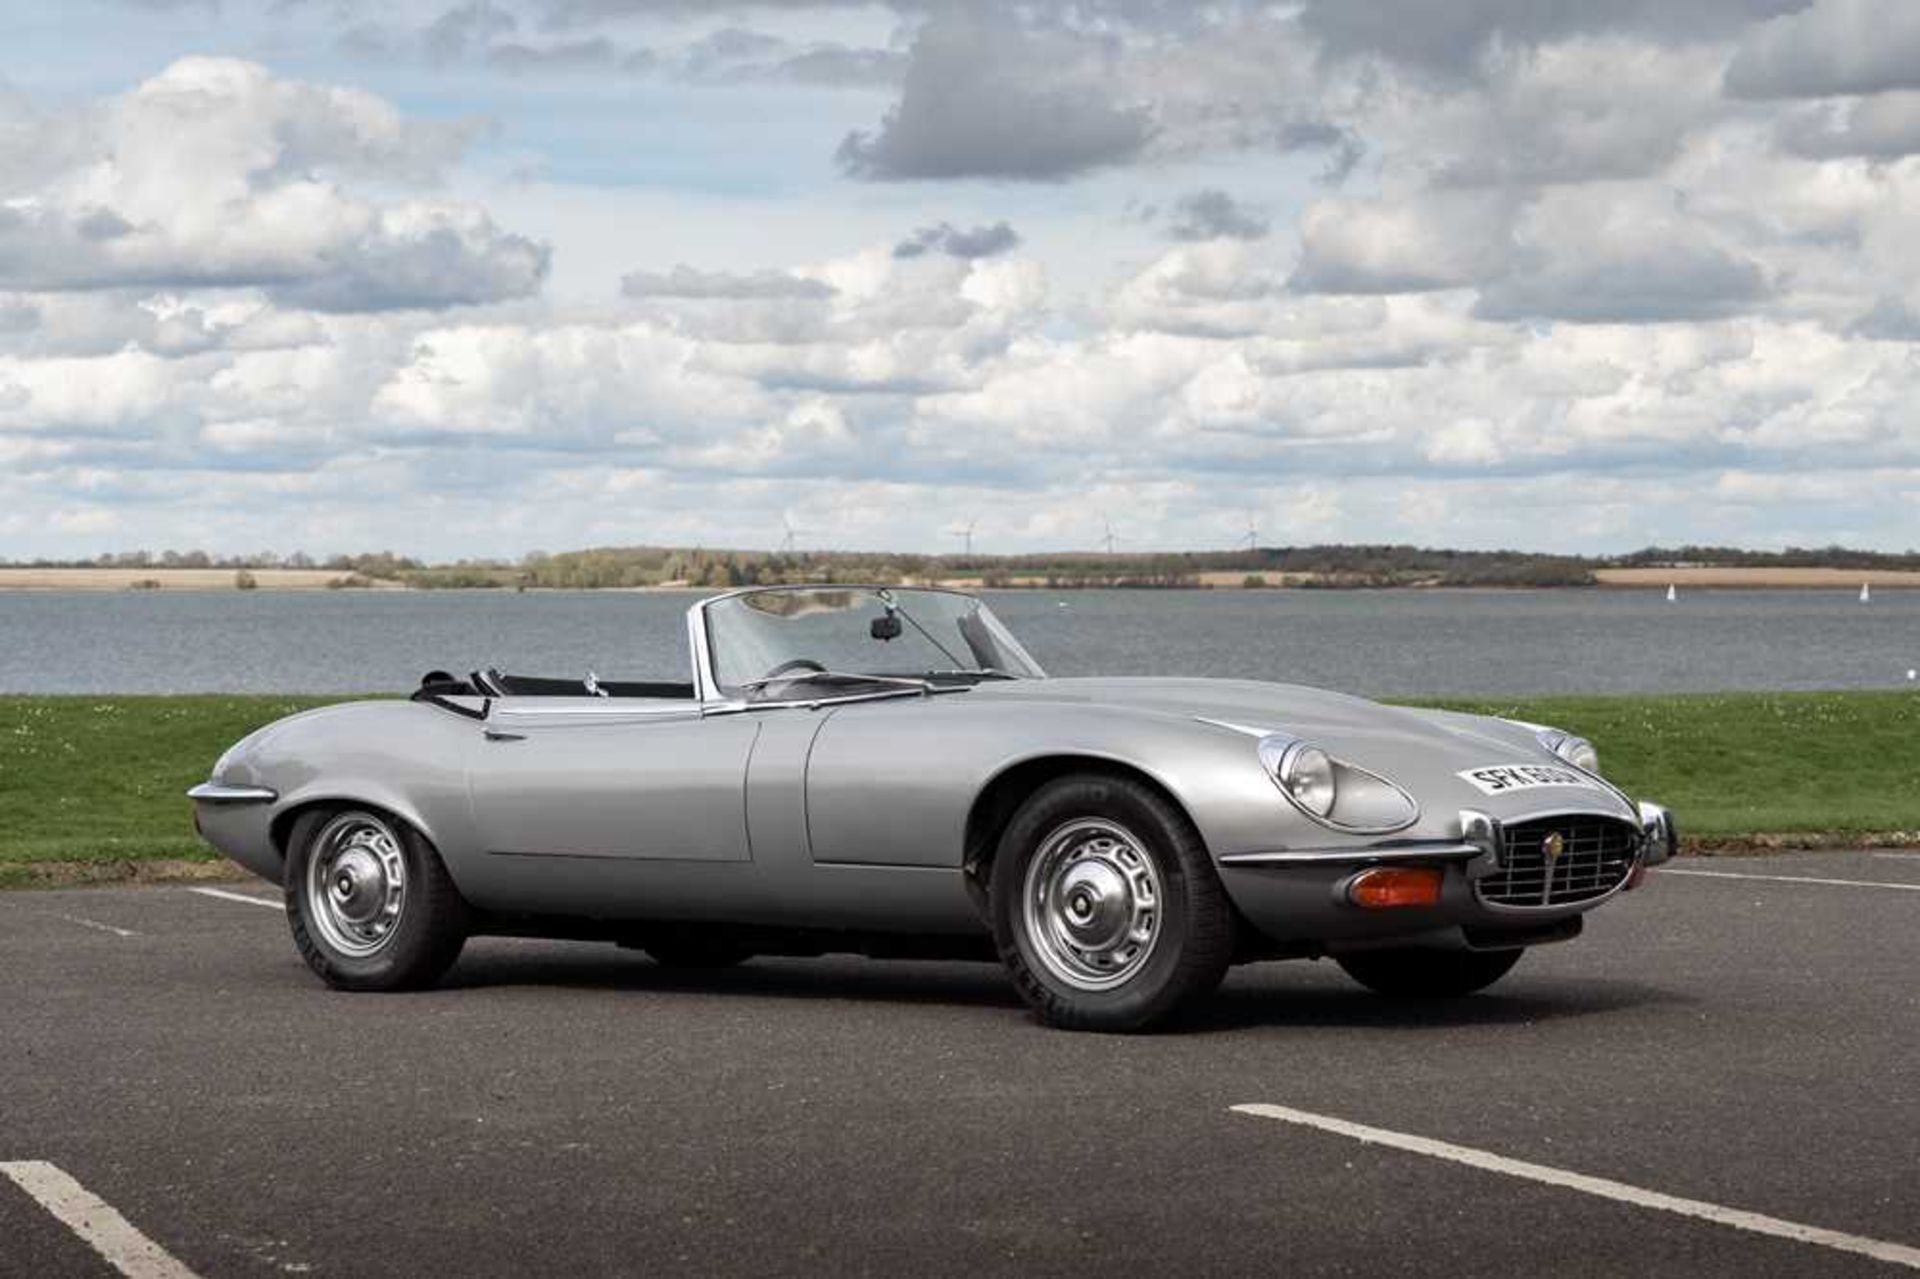 1974 Jaguar E-Type Series III V12 Roadster Only one family owner and 54,412 miles from new - Image 87 of 89